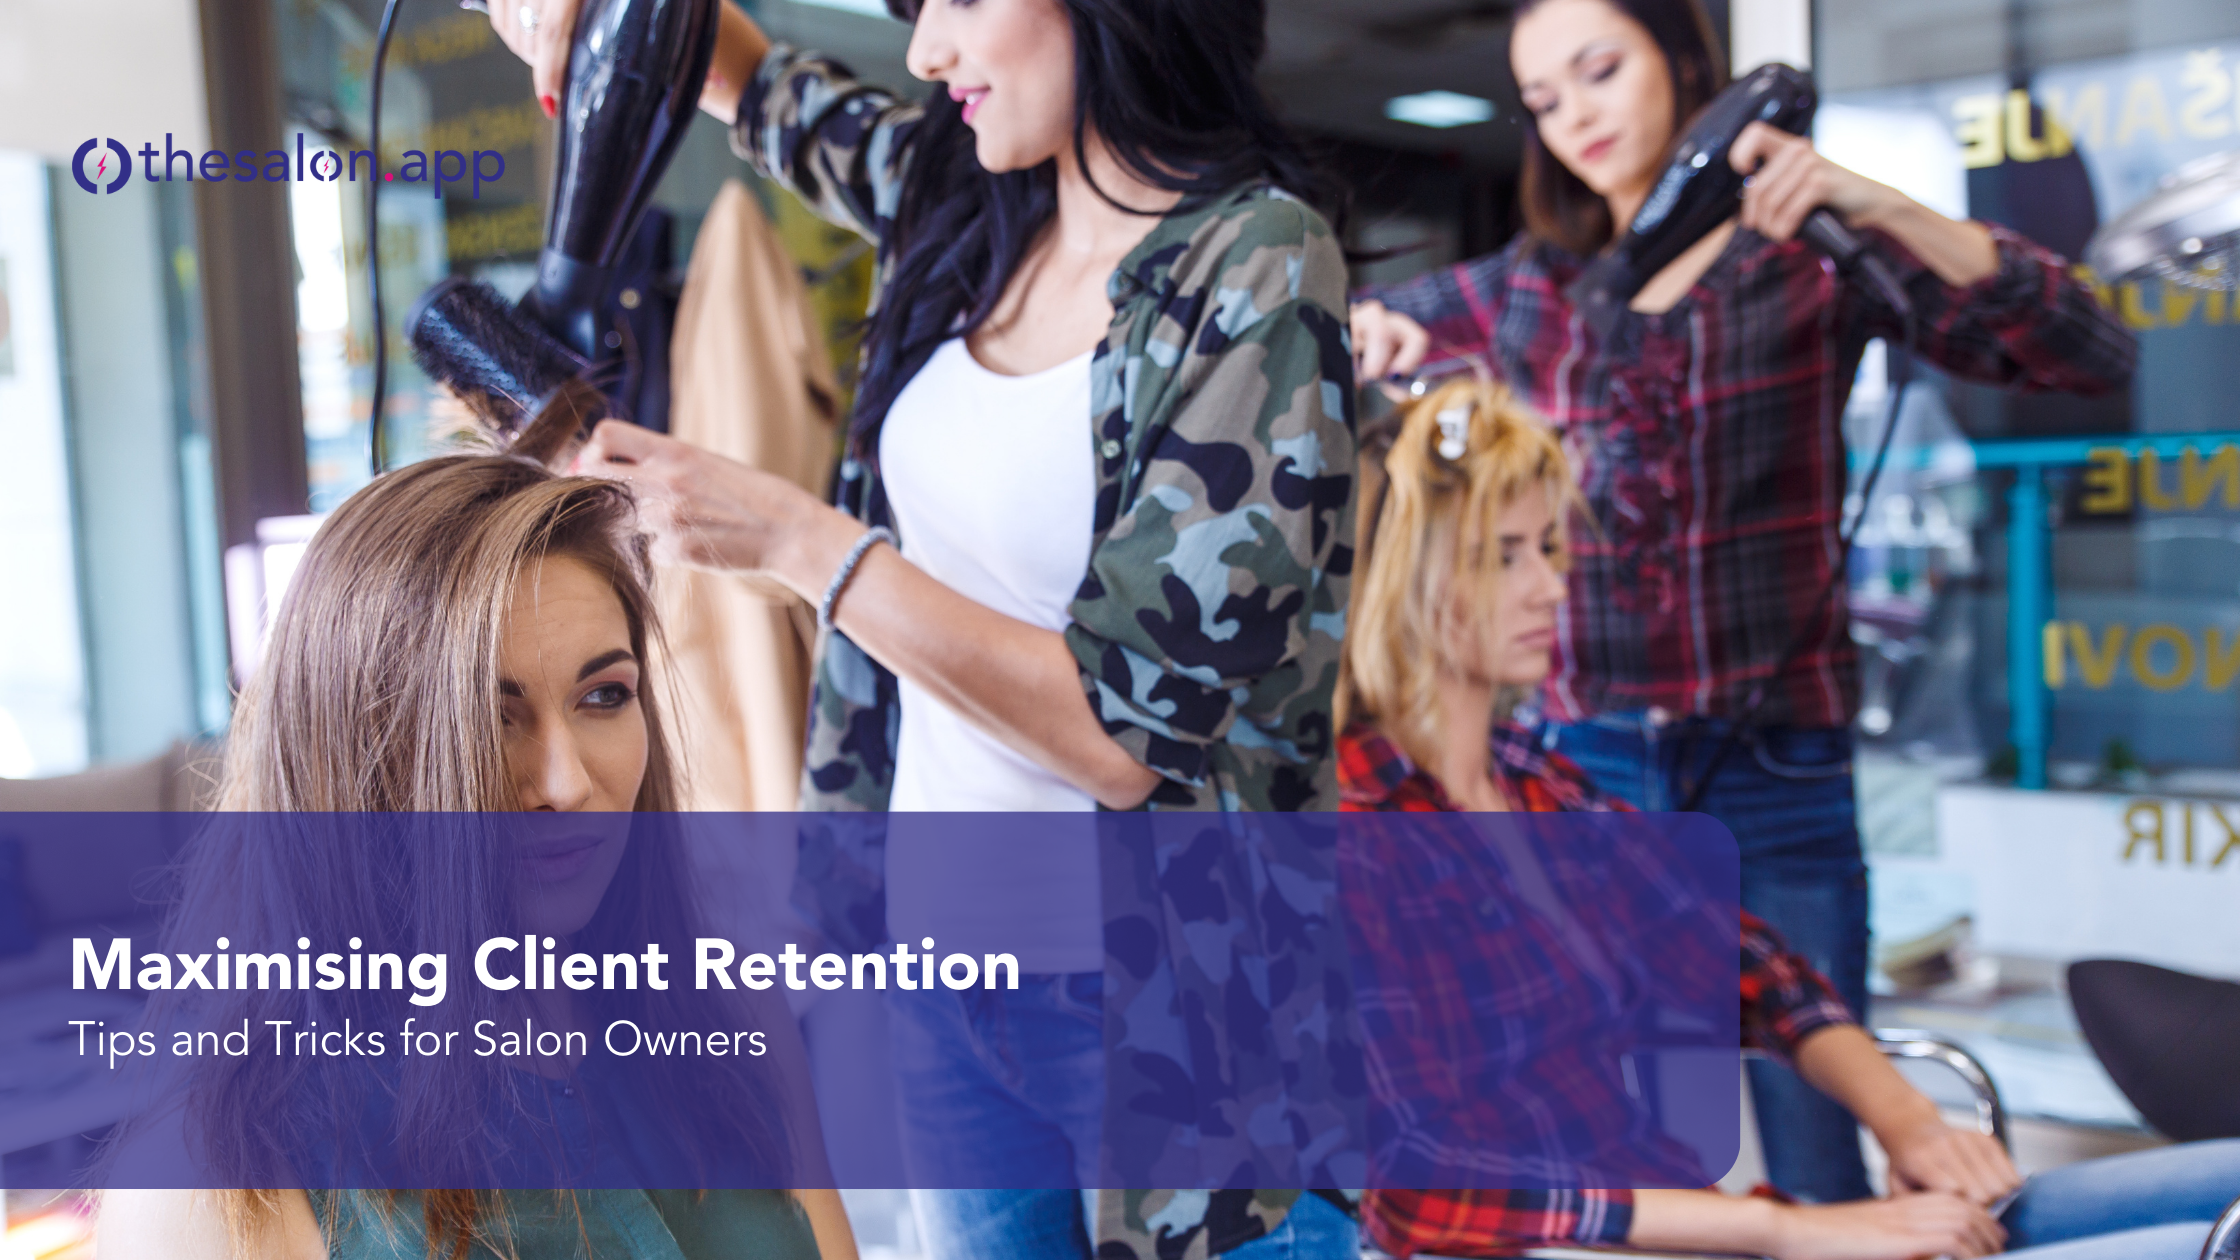 Maximising client retention: Tips and tricks for salon owners